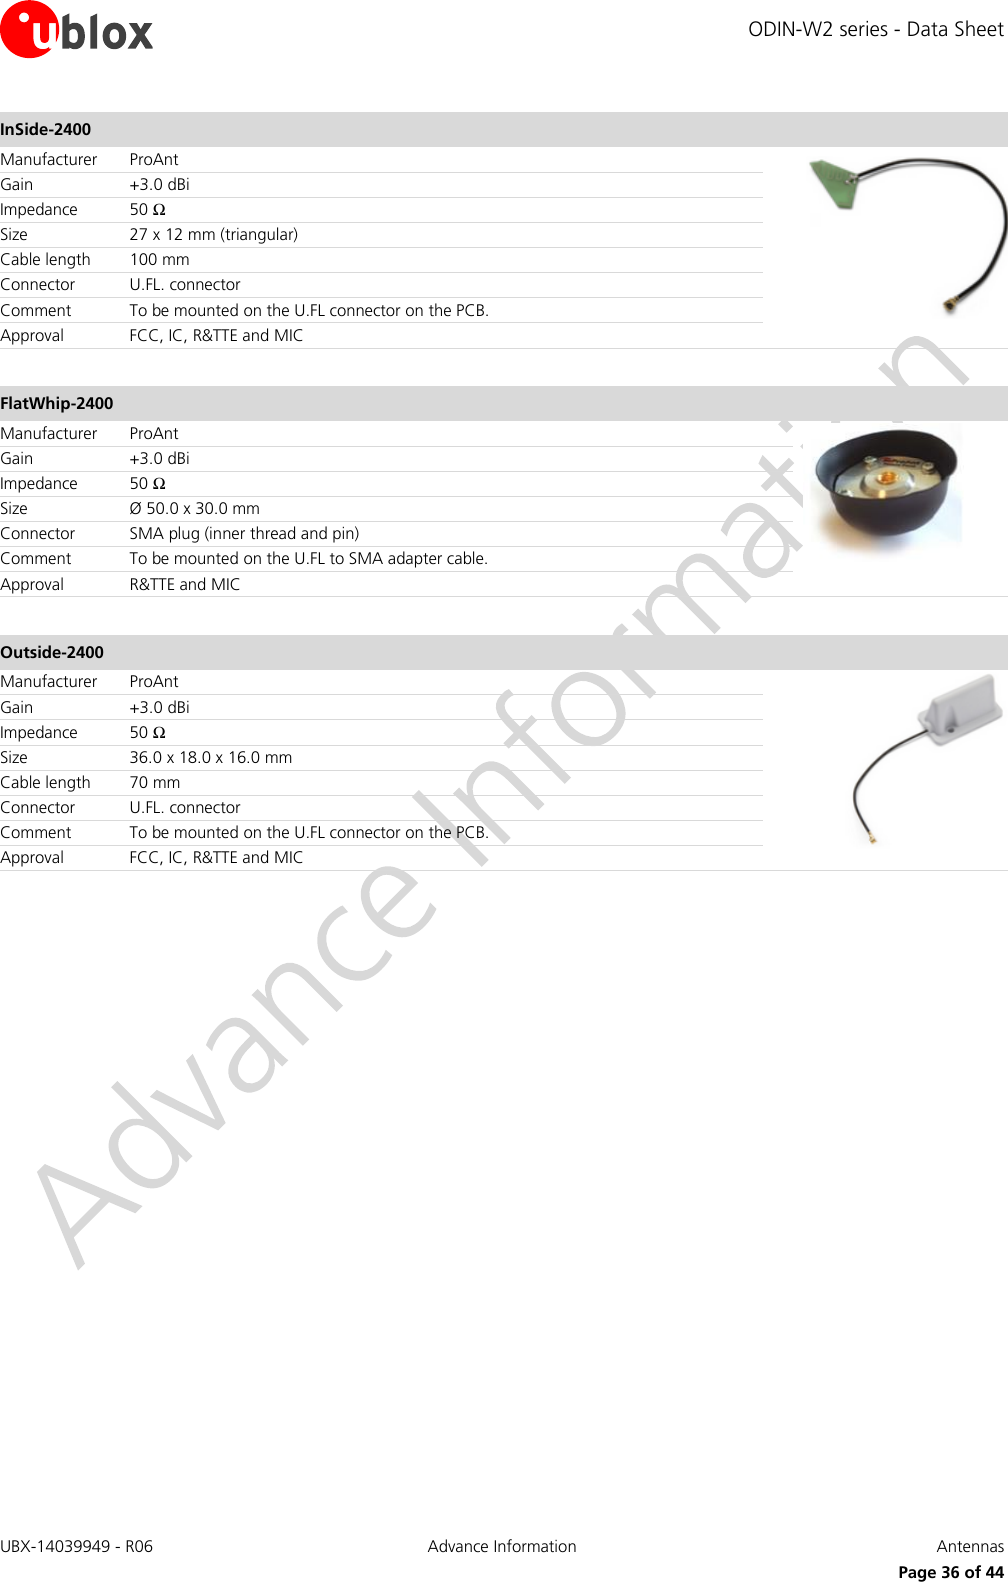 ODIN-W2 series - Data Sheet UBX-14039949 - R06 Advance Information  Antennas     Page 36 of 44 InSide-2400  Manufacturer ProAnt  Gain +3.0 dBi Impedance 50 Ω Size 27 x 12 mm (triangular) Cable length 100 mm Connector U.FL. connector  Comment To be mounted on the U.FL connector on the PCB.  Approval FCC, IC, R&amp;TTE and MIC  FlatWhip-2400  Manufacturer ProAnt  Gain +3.0 dBi Impedance 50 Ω Size Ø 50.0 x 30.0 mm Connector SMA plug (inner thread and pin) Comment To be mounted on the U.FL to SMA adapter cable. Approval R&amp;TTE and MIC  Outside-2400  Manufacturer ProAnt  Gain +3.0 dBi Impedance 50 Ω Size 36.0 x 18.0 x 16.0 mm Cable length 70 mm Connector U.FL. connector  Comment To be mounted on the U.FL connector on the PCB.  Approval FCC, IC, R&amp;TTE and MIC     